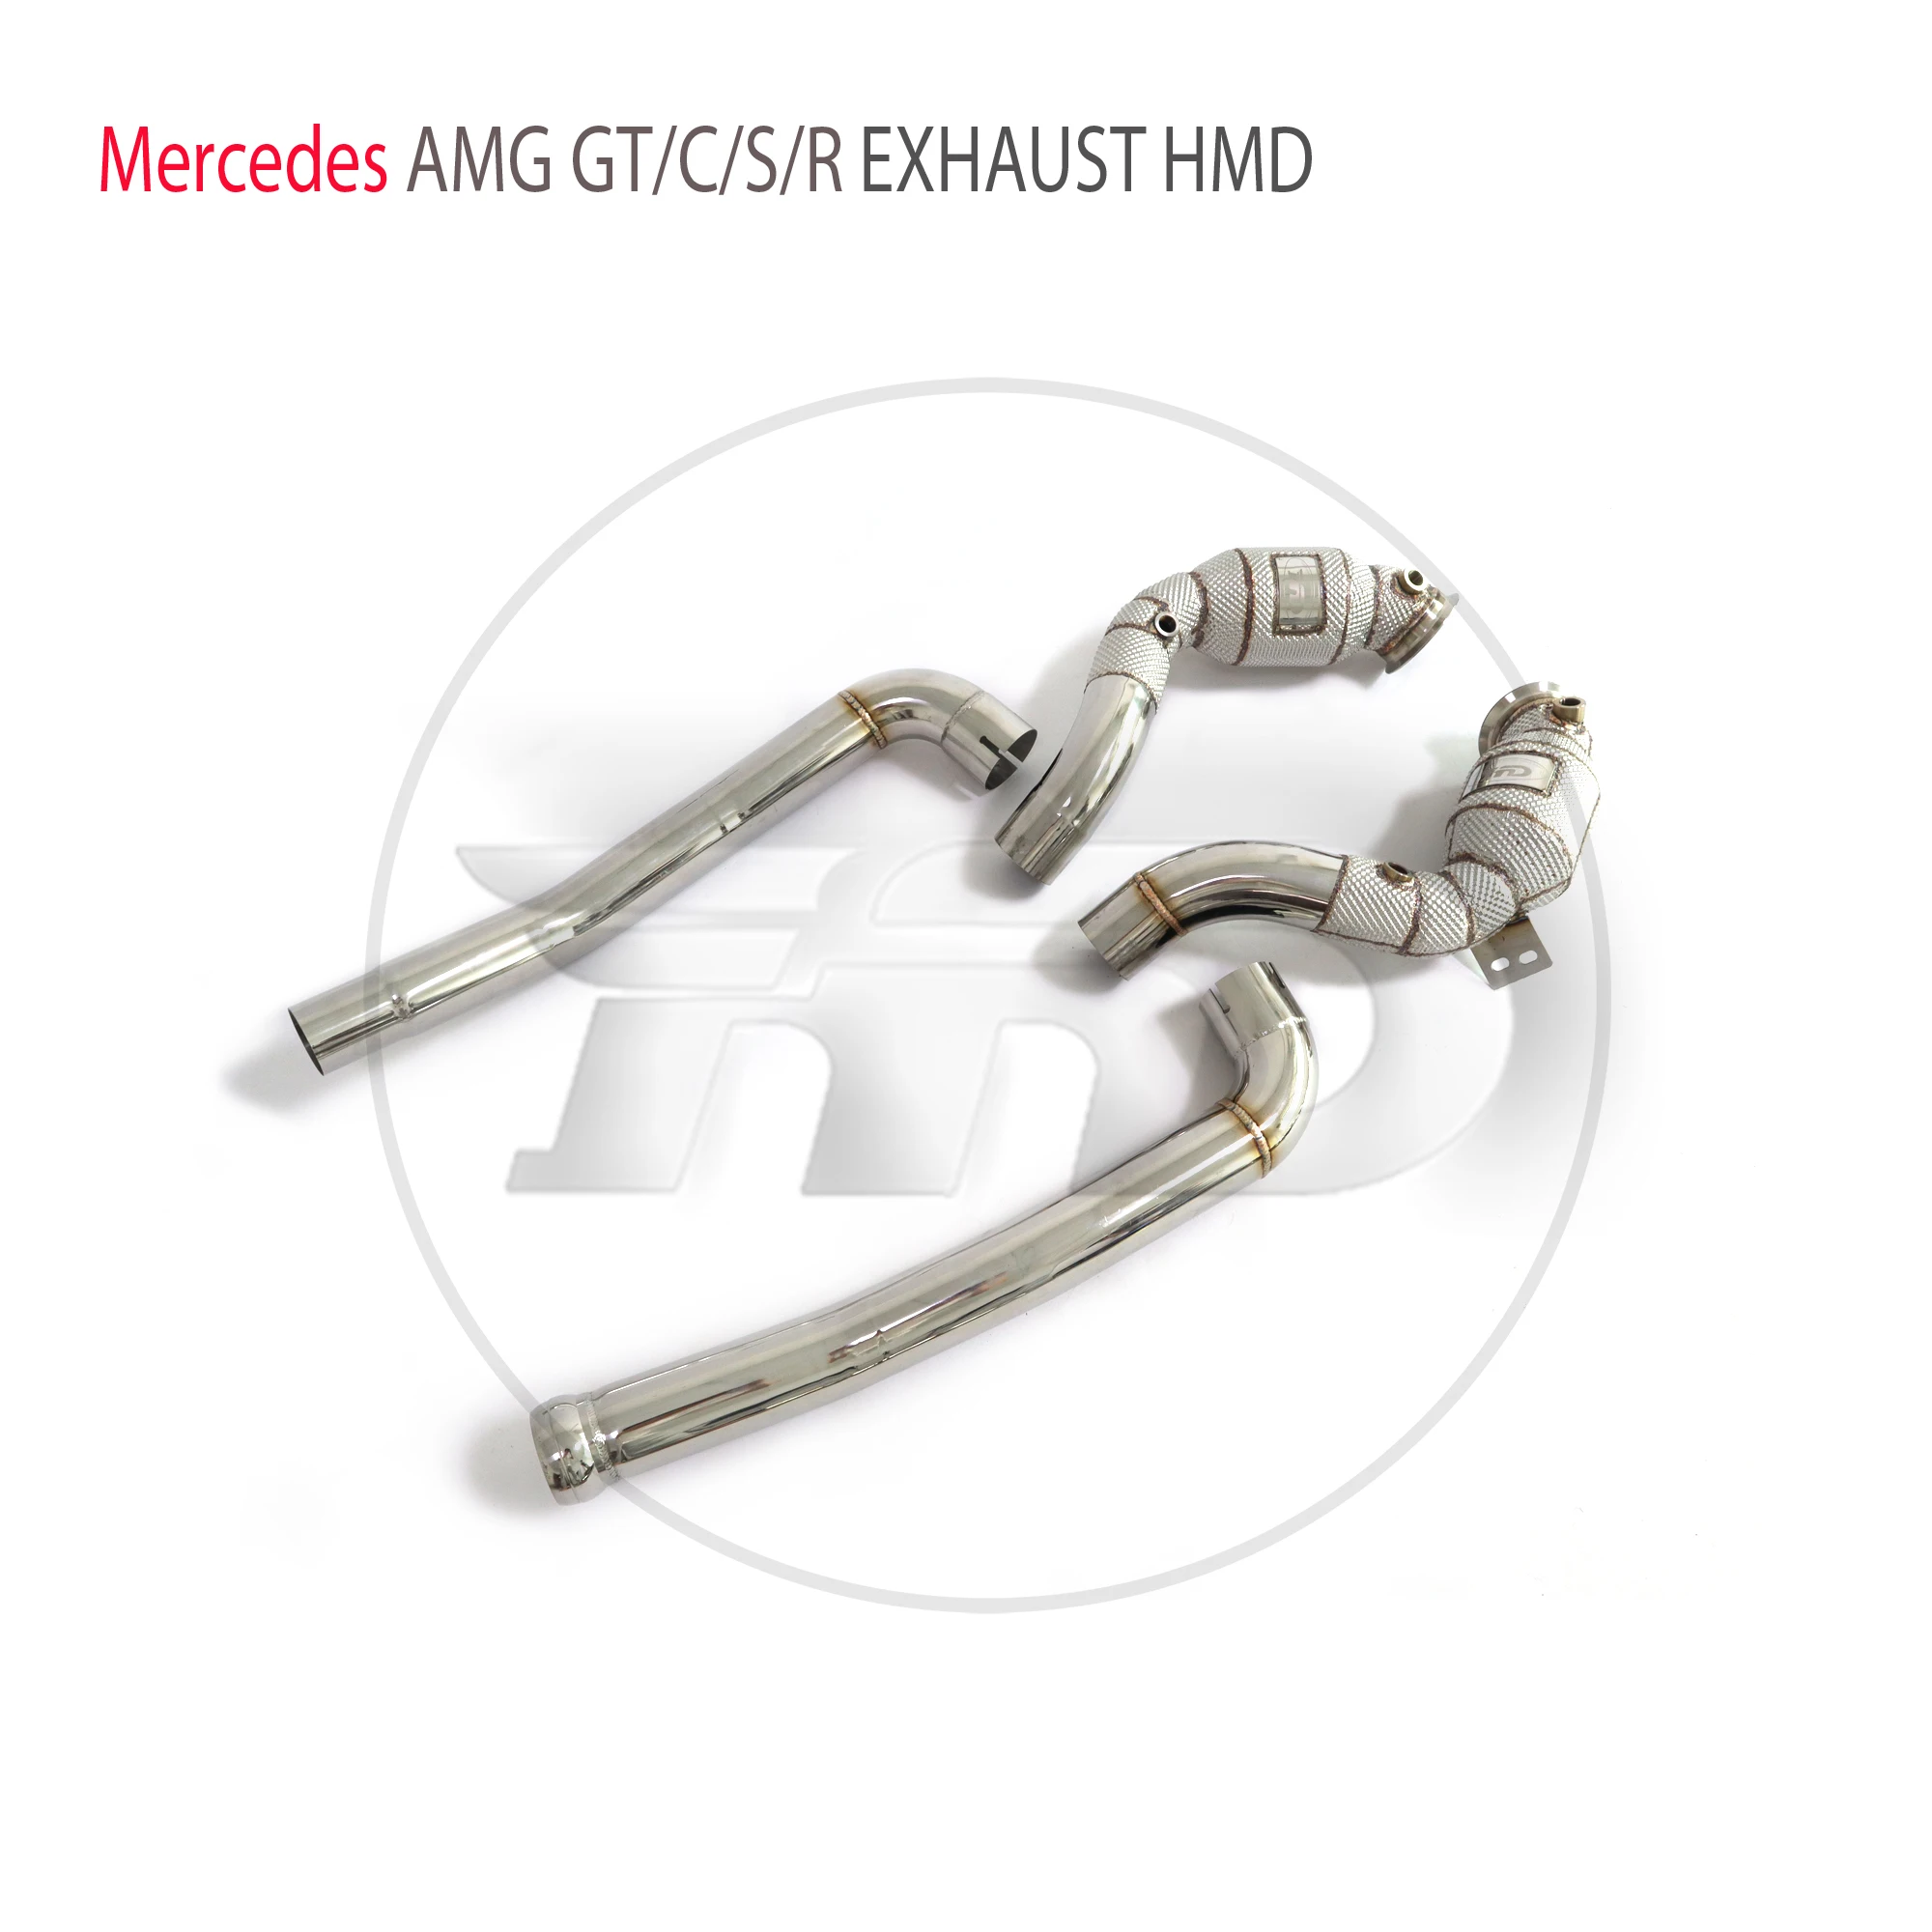 

HMD Exhaust System High Flow Performance Downpipe for Mercedes Benz AMG GT GTC GTS GTR With Catalytic Converter